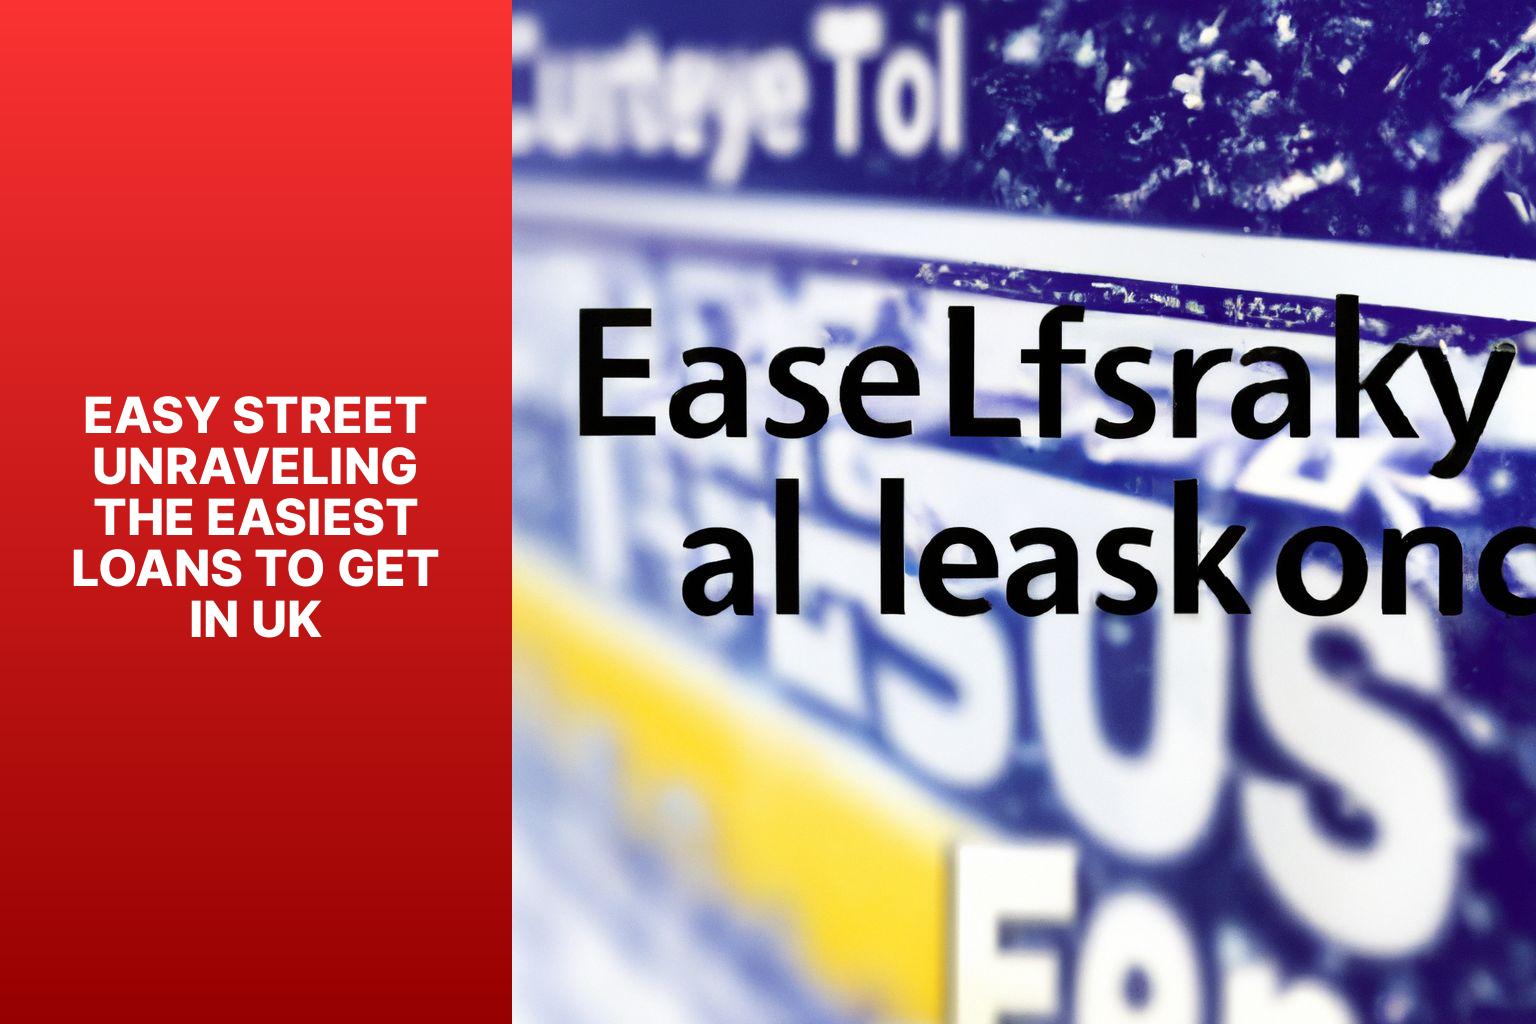 Easy Street Unraveling the Easiest Loans to Get in UK